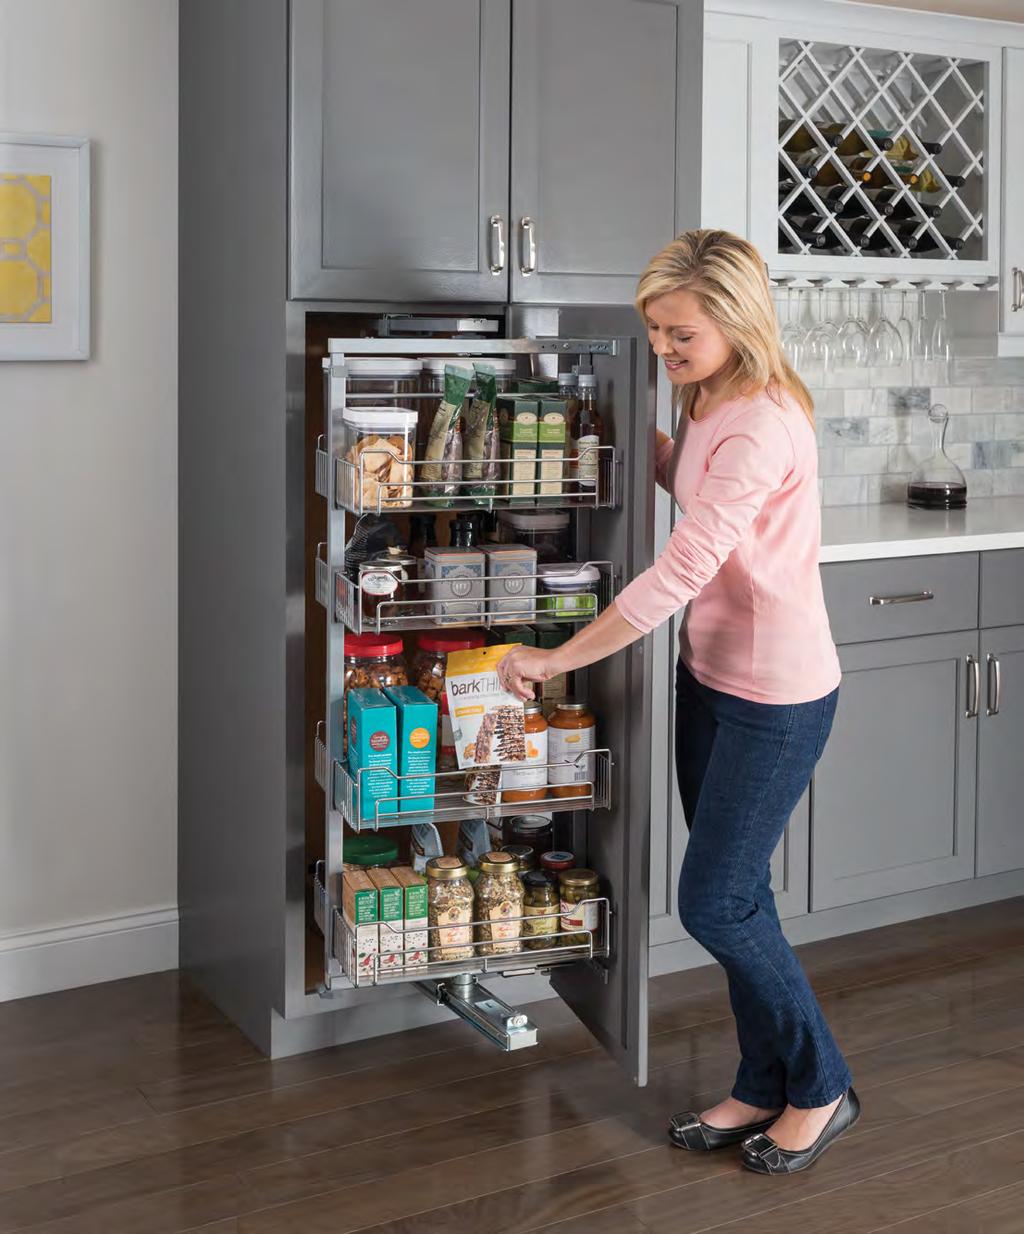 Cabinet Pantry : Premium Chrome Swingout rotating Scan to watch the installation video http://delivr.